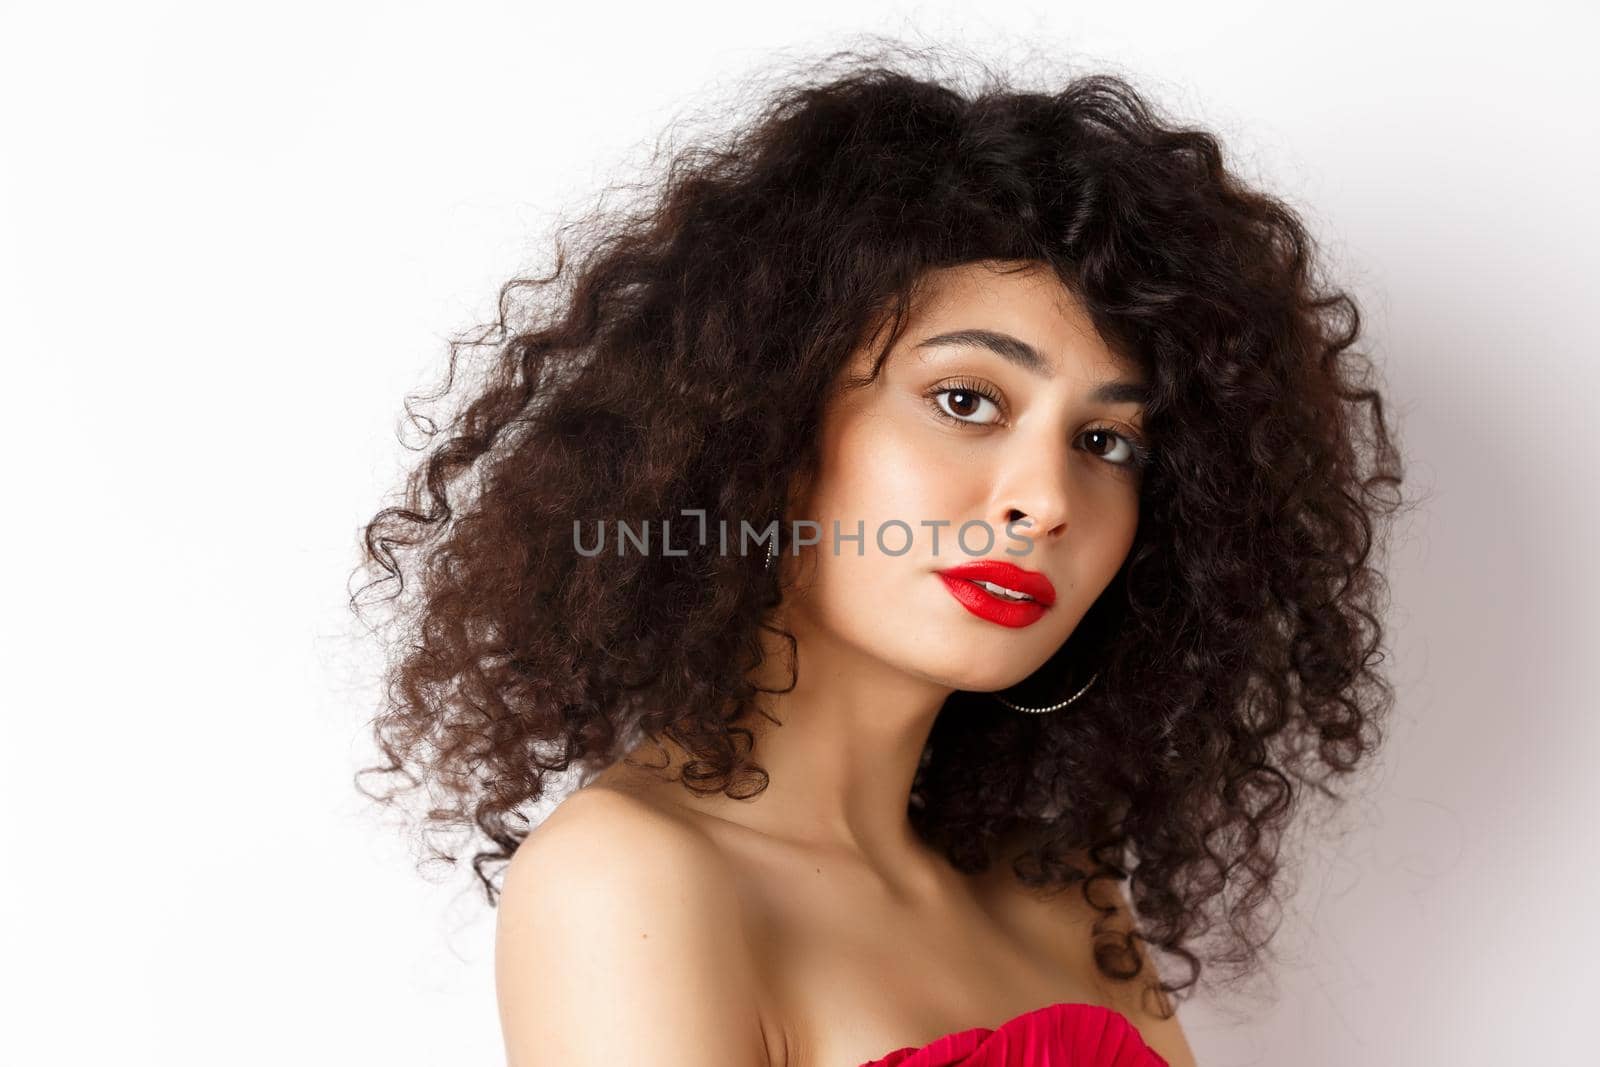 Close-up of beautiful caucasian woman with curly haircut and red lipstick, looking tender at camera, standing over white background.